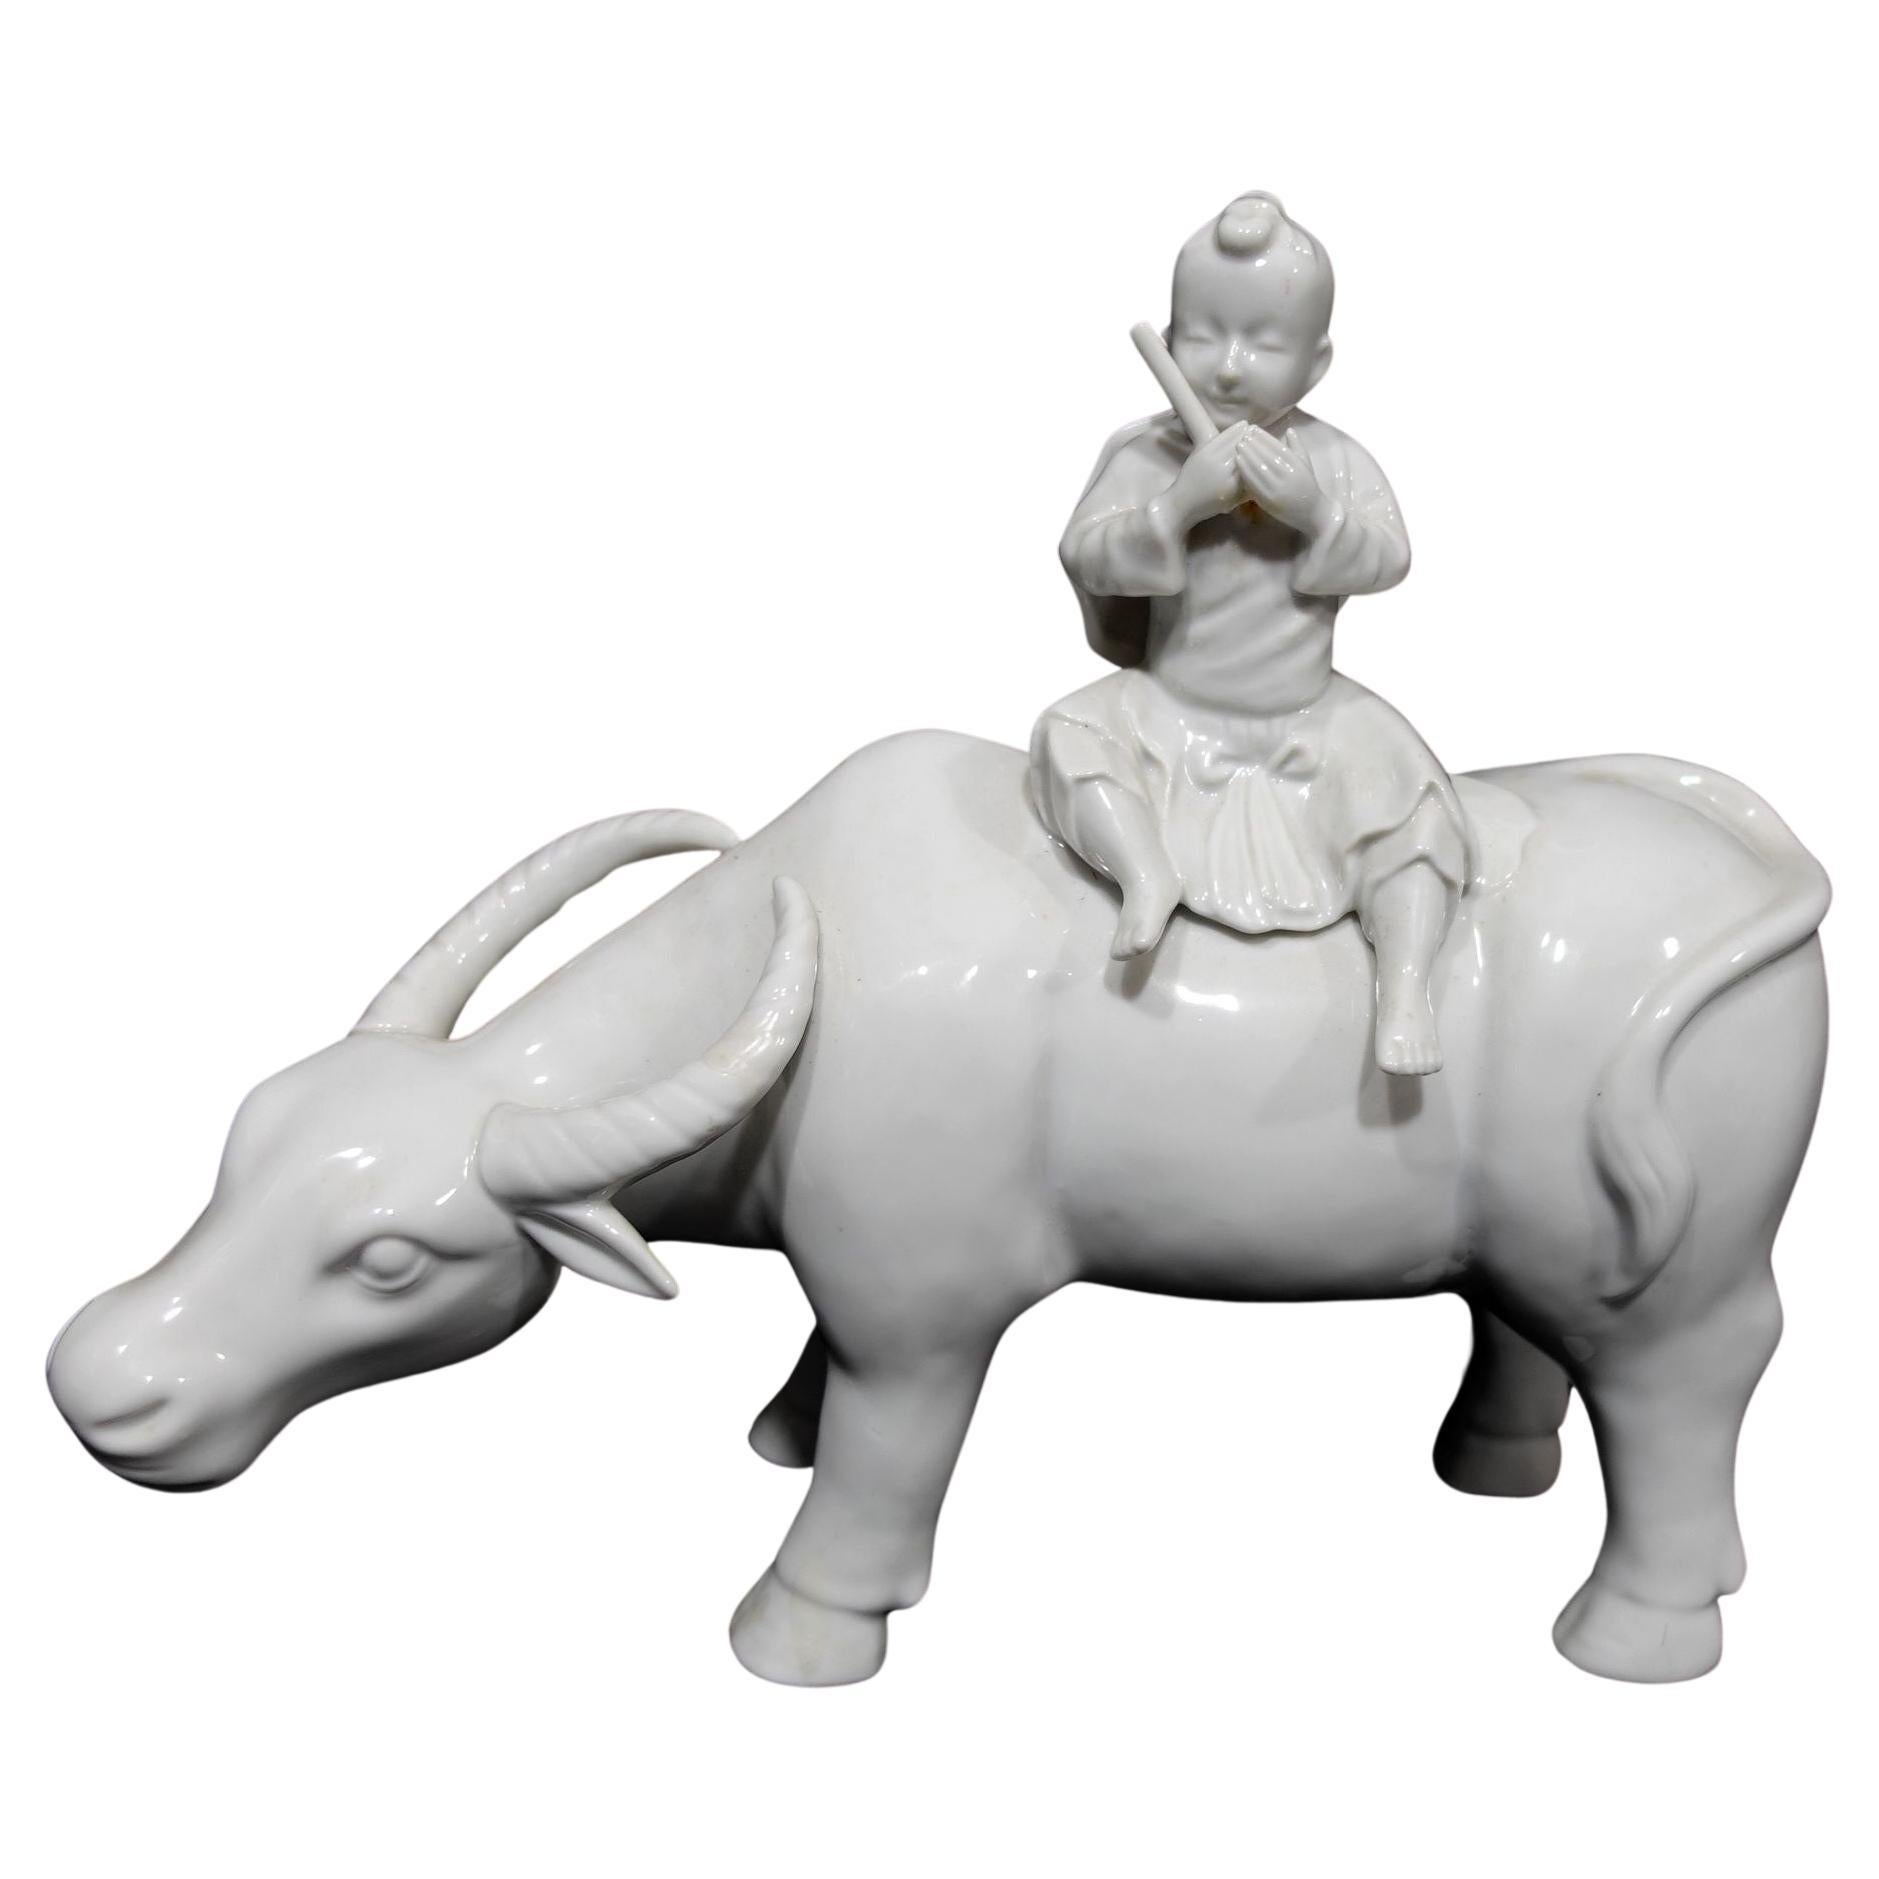 Chinese Export Porcelain Blanc de chine Water Buffalo with Child Riding For Sale